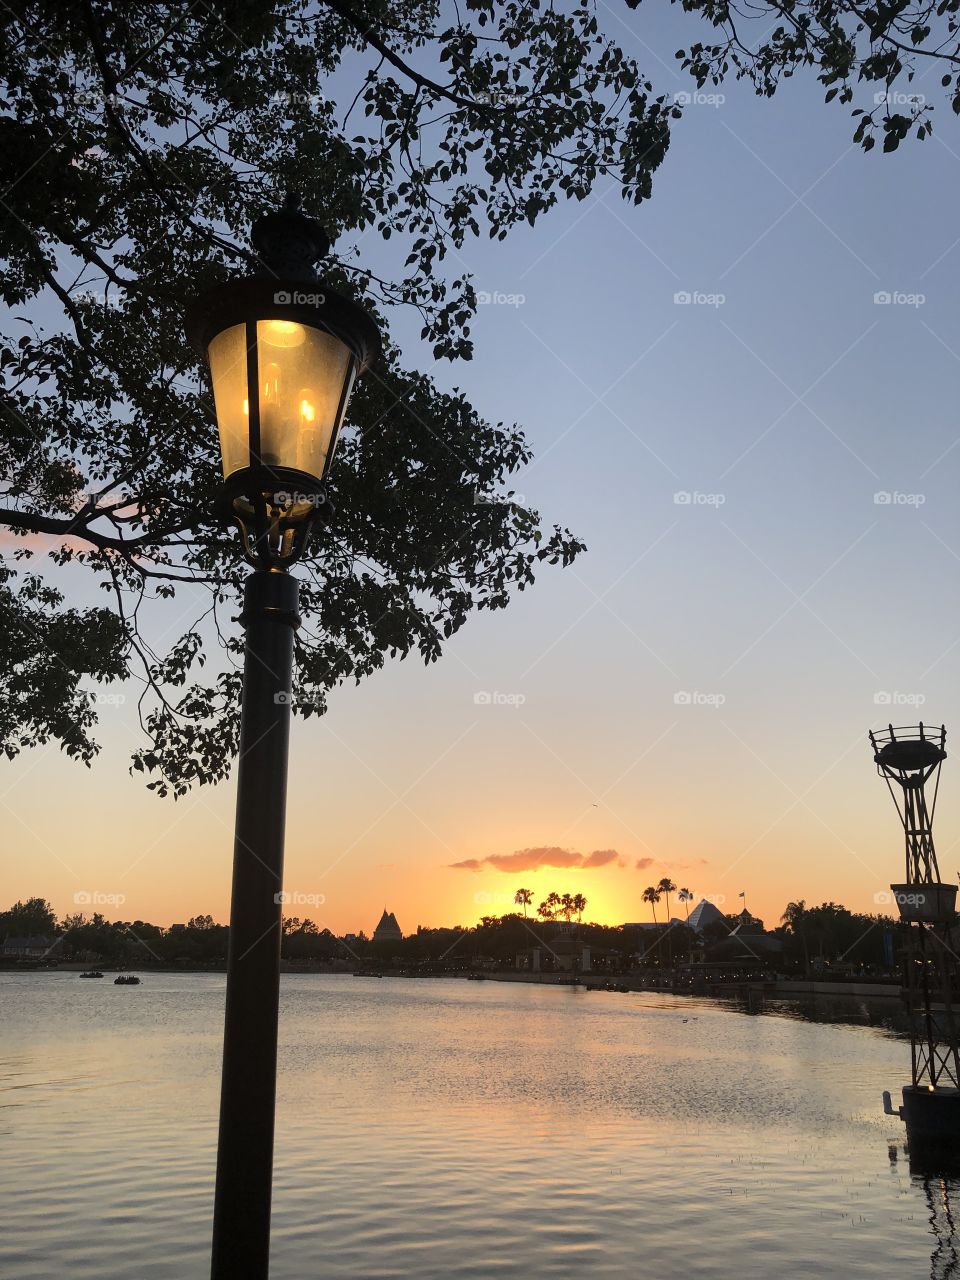 Sunsetting on Epcot - perfect ending to a magical vacation